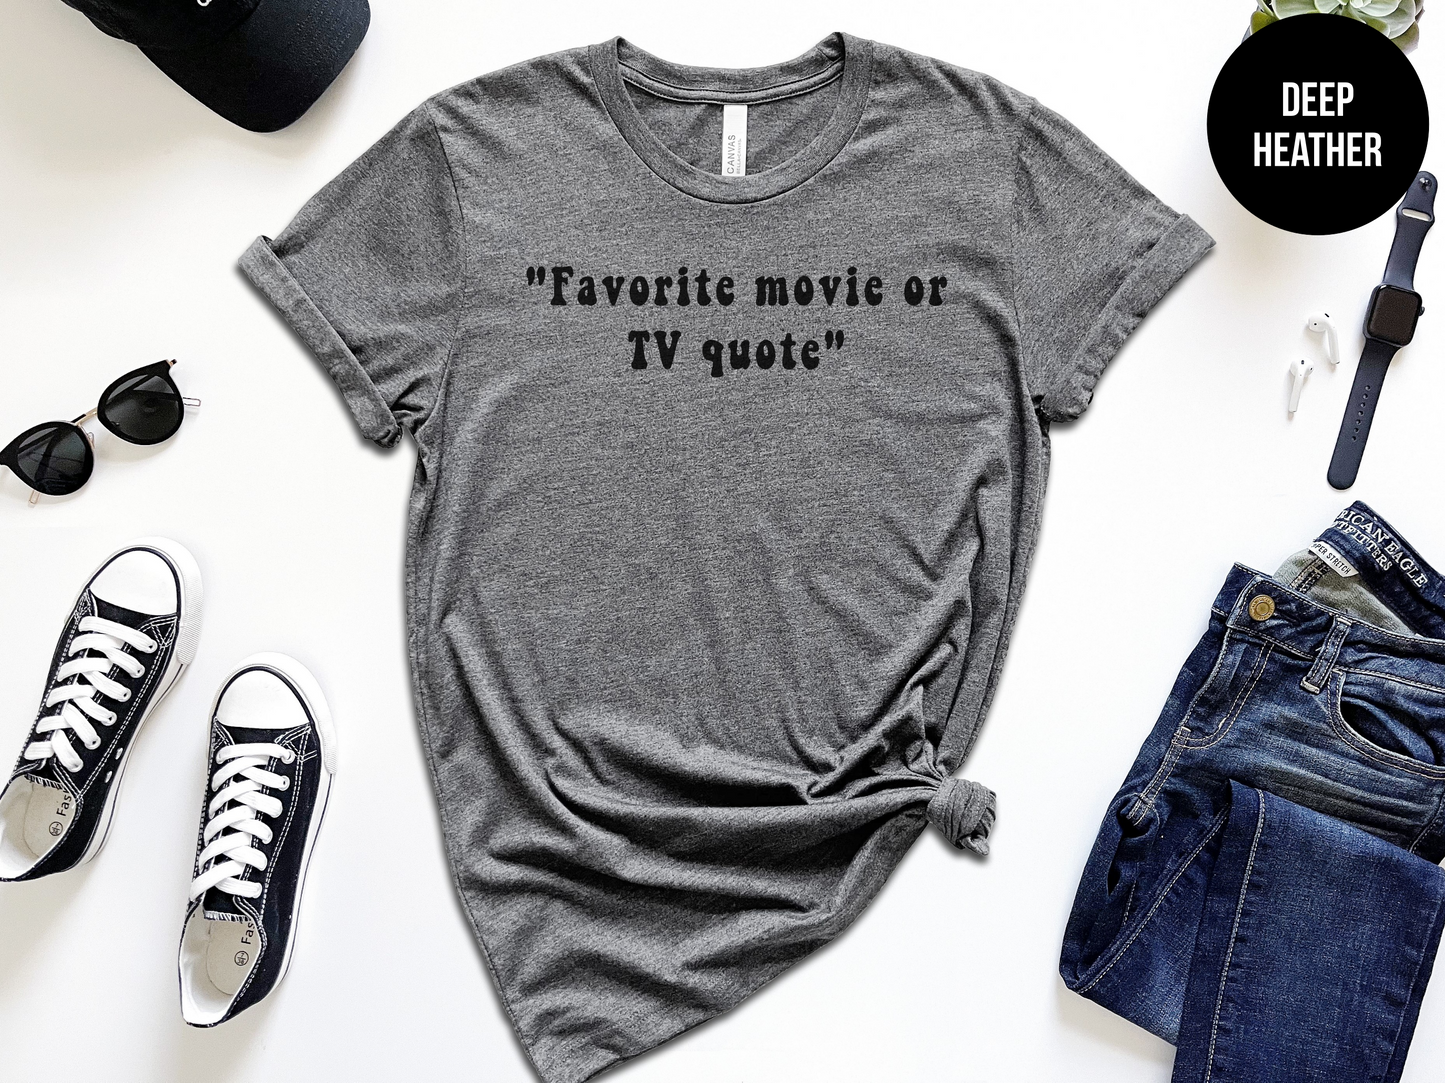 Movie or TV Quote Shirt